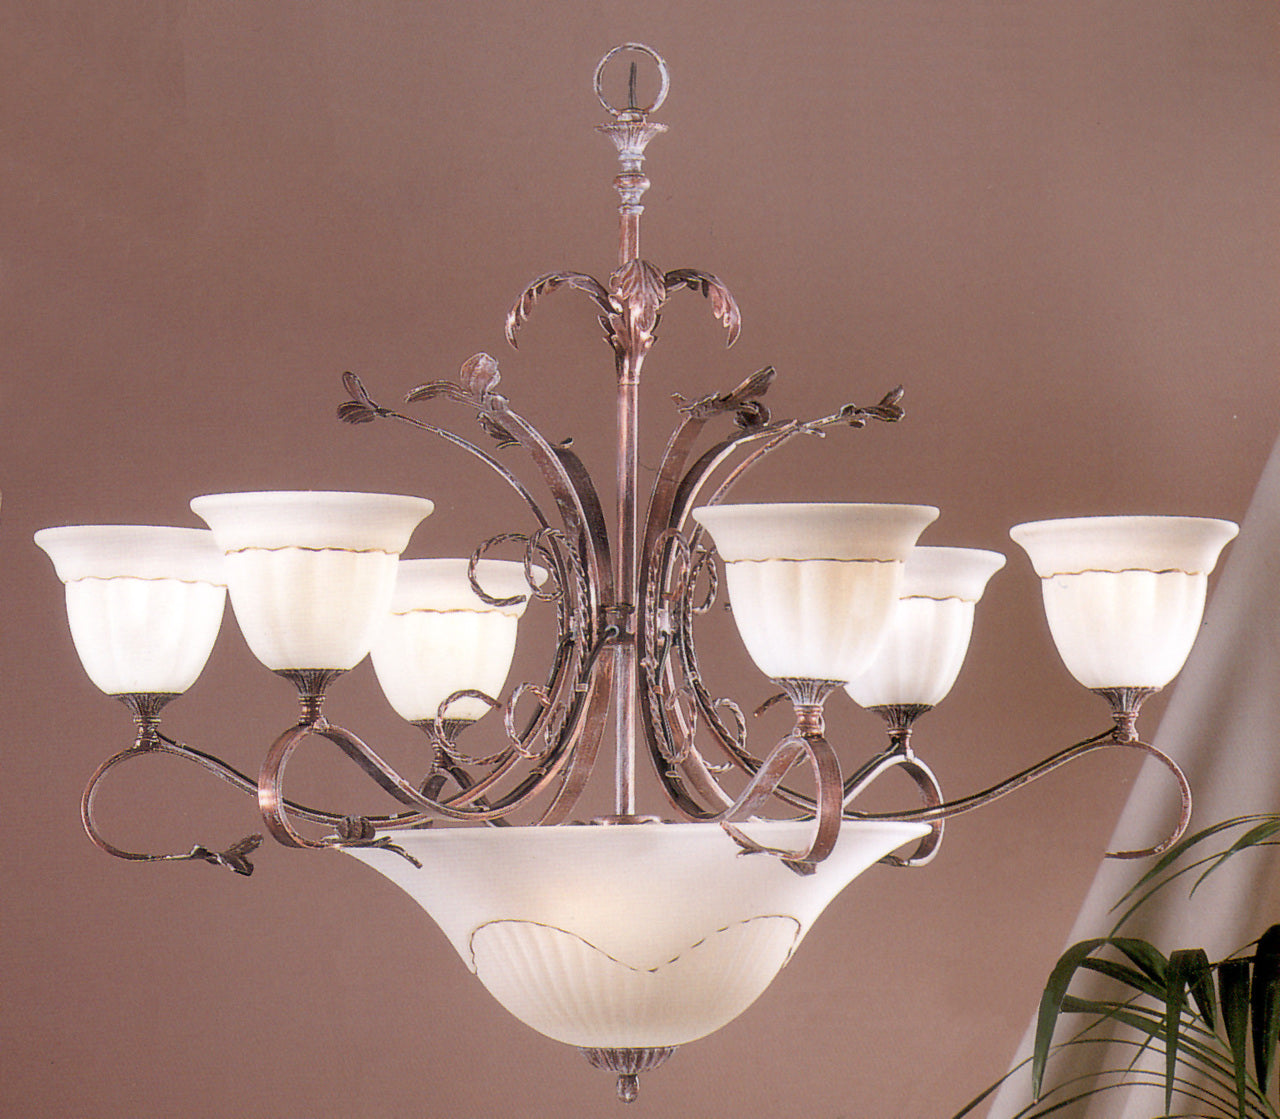 Classic Lighting 4119 WC Treviso Wrought Iron Chandelier in Weathered Clay (Imported from Italy)